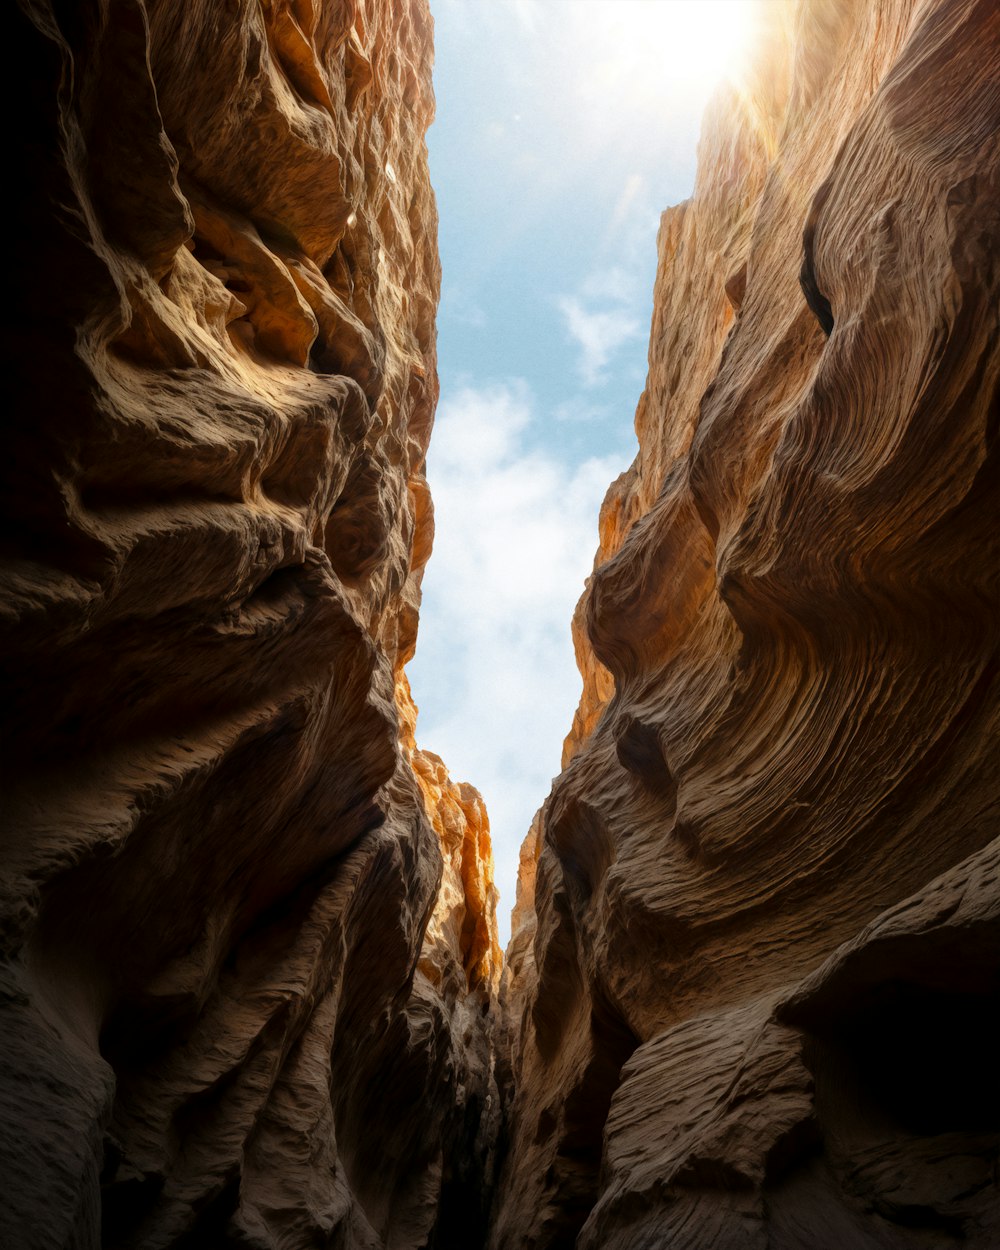 a narrow canyon with a bright light coming through it